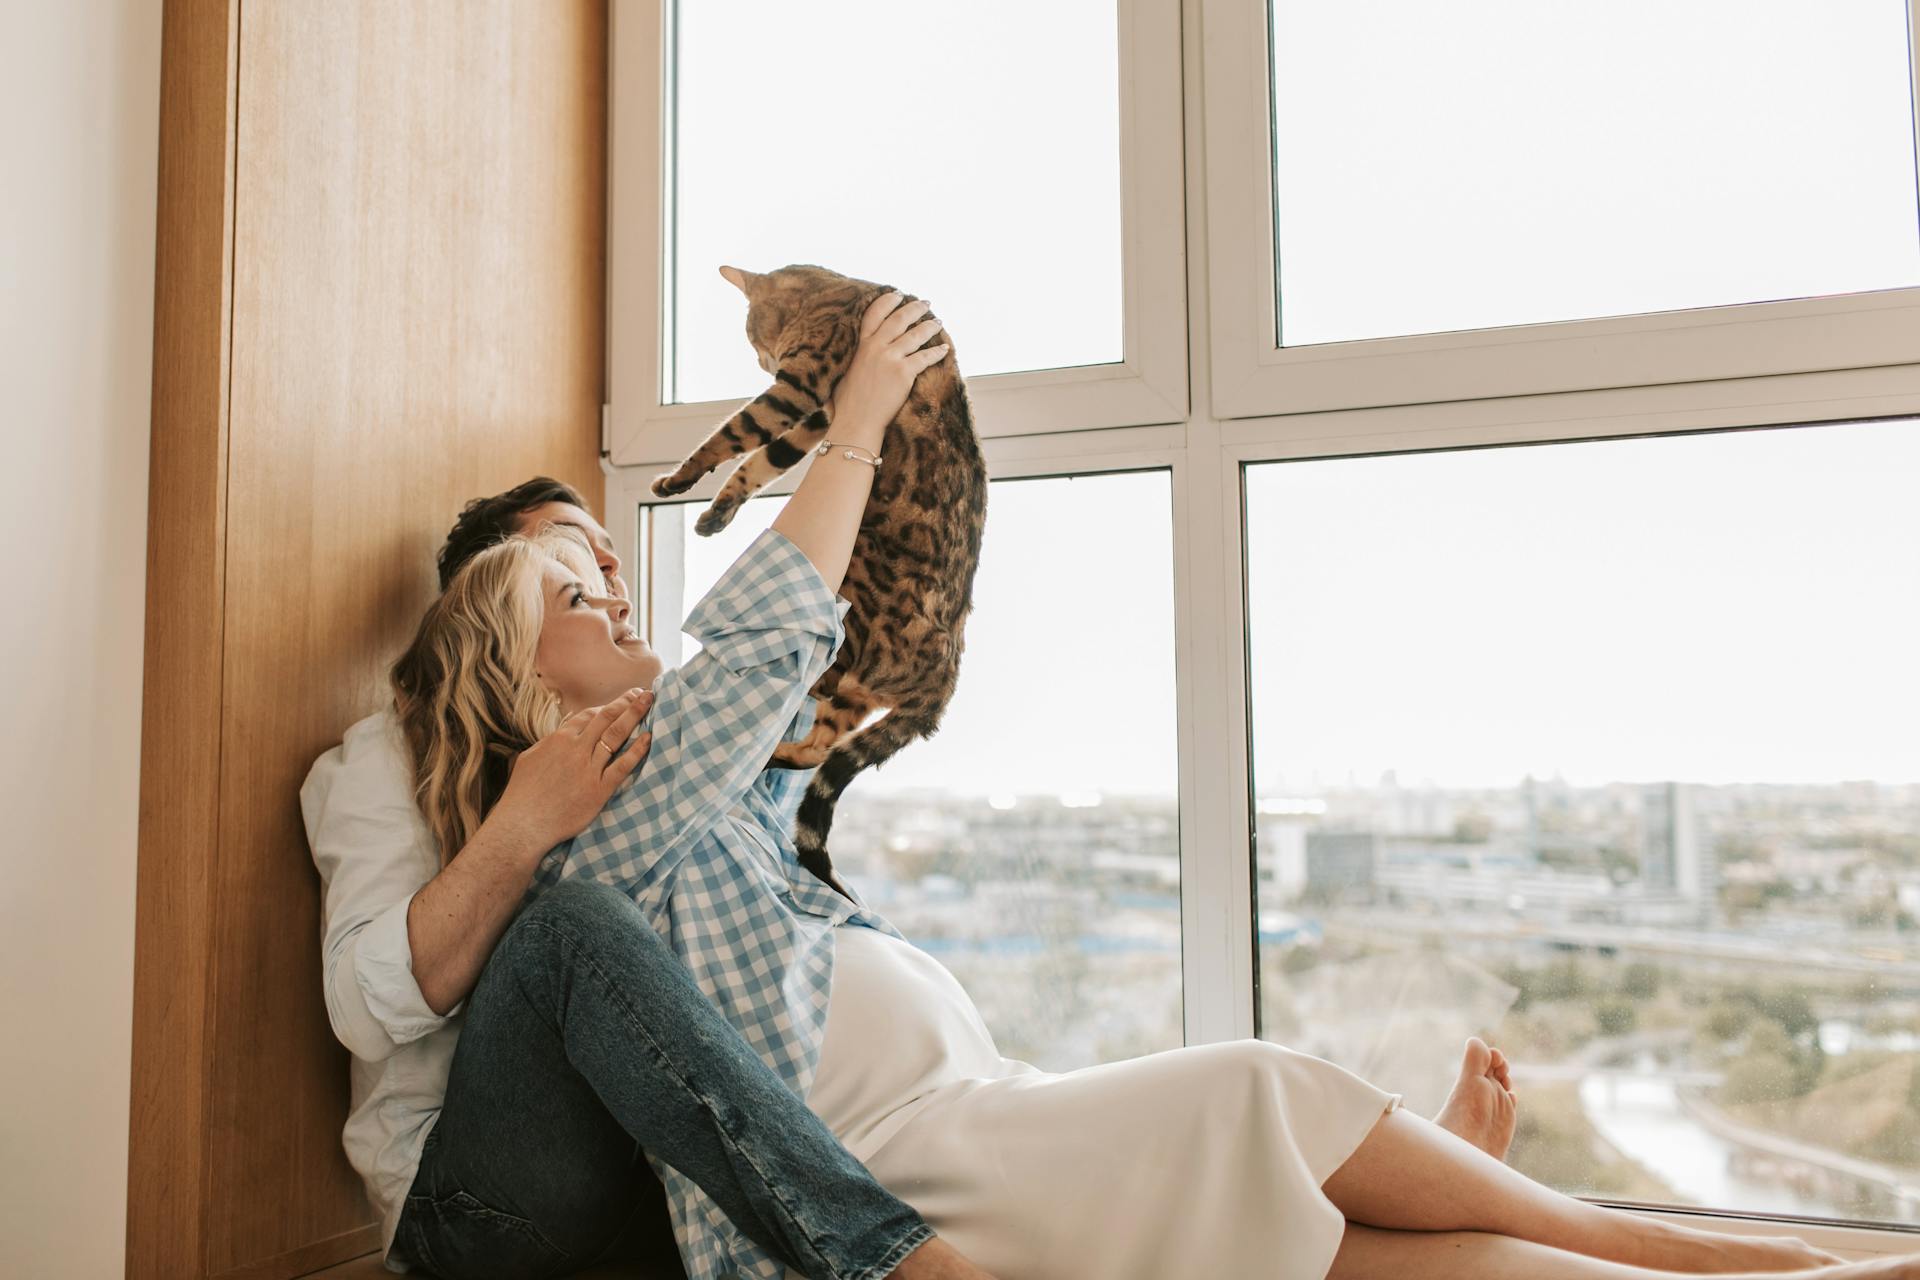 A pregnant couple sitting by the window and playing with their cat | Source: Pexels